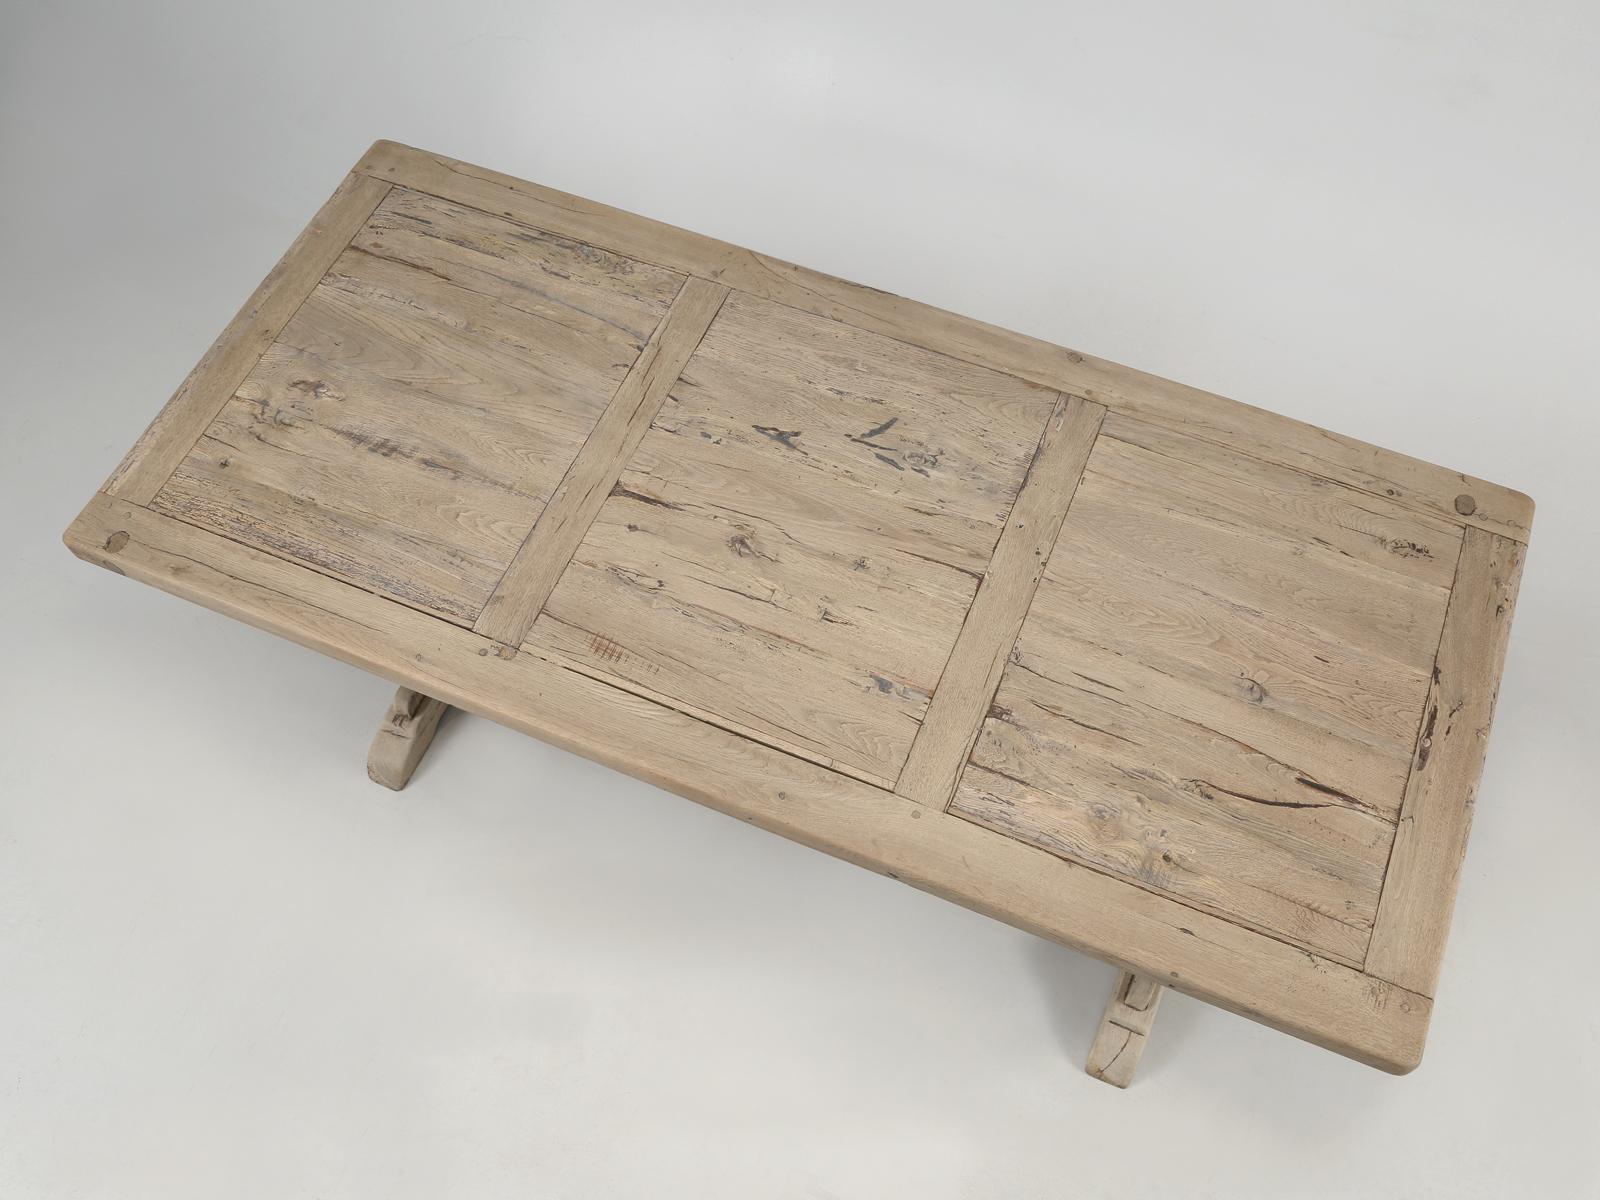 Rustic French white oak farm table, kitchen table or dining table in its natural unrestored state. Although structurally sound, cosmetically it was left original and should you want it refinished, we are only too happy to accommodate. The rustic